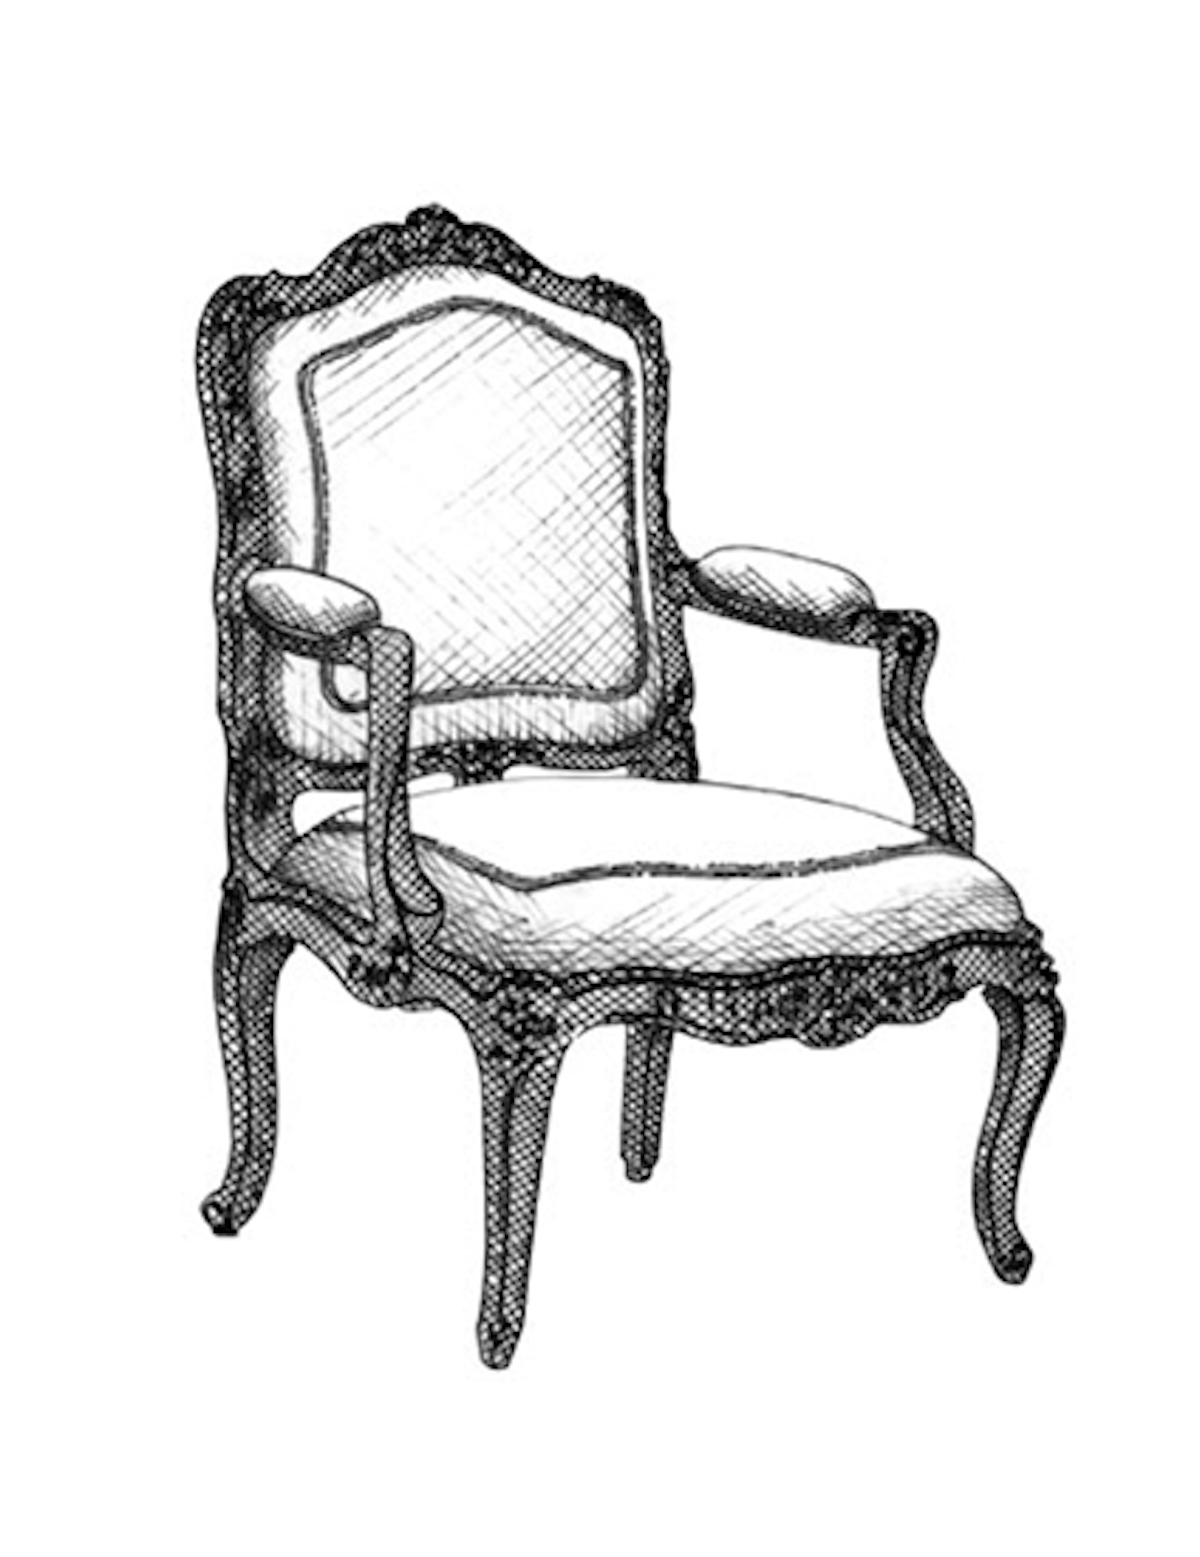 The Best of Chair Design - Top 10 Chair Styles - Louis XV fauteuil